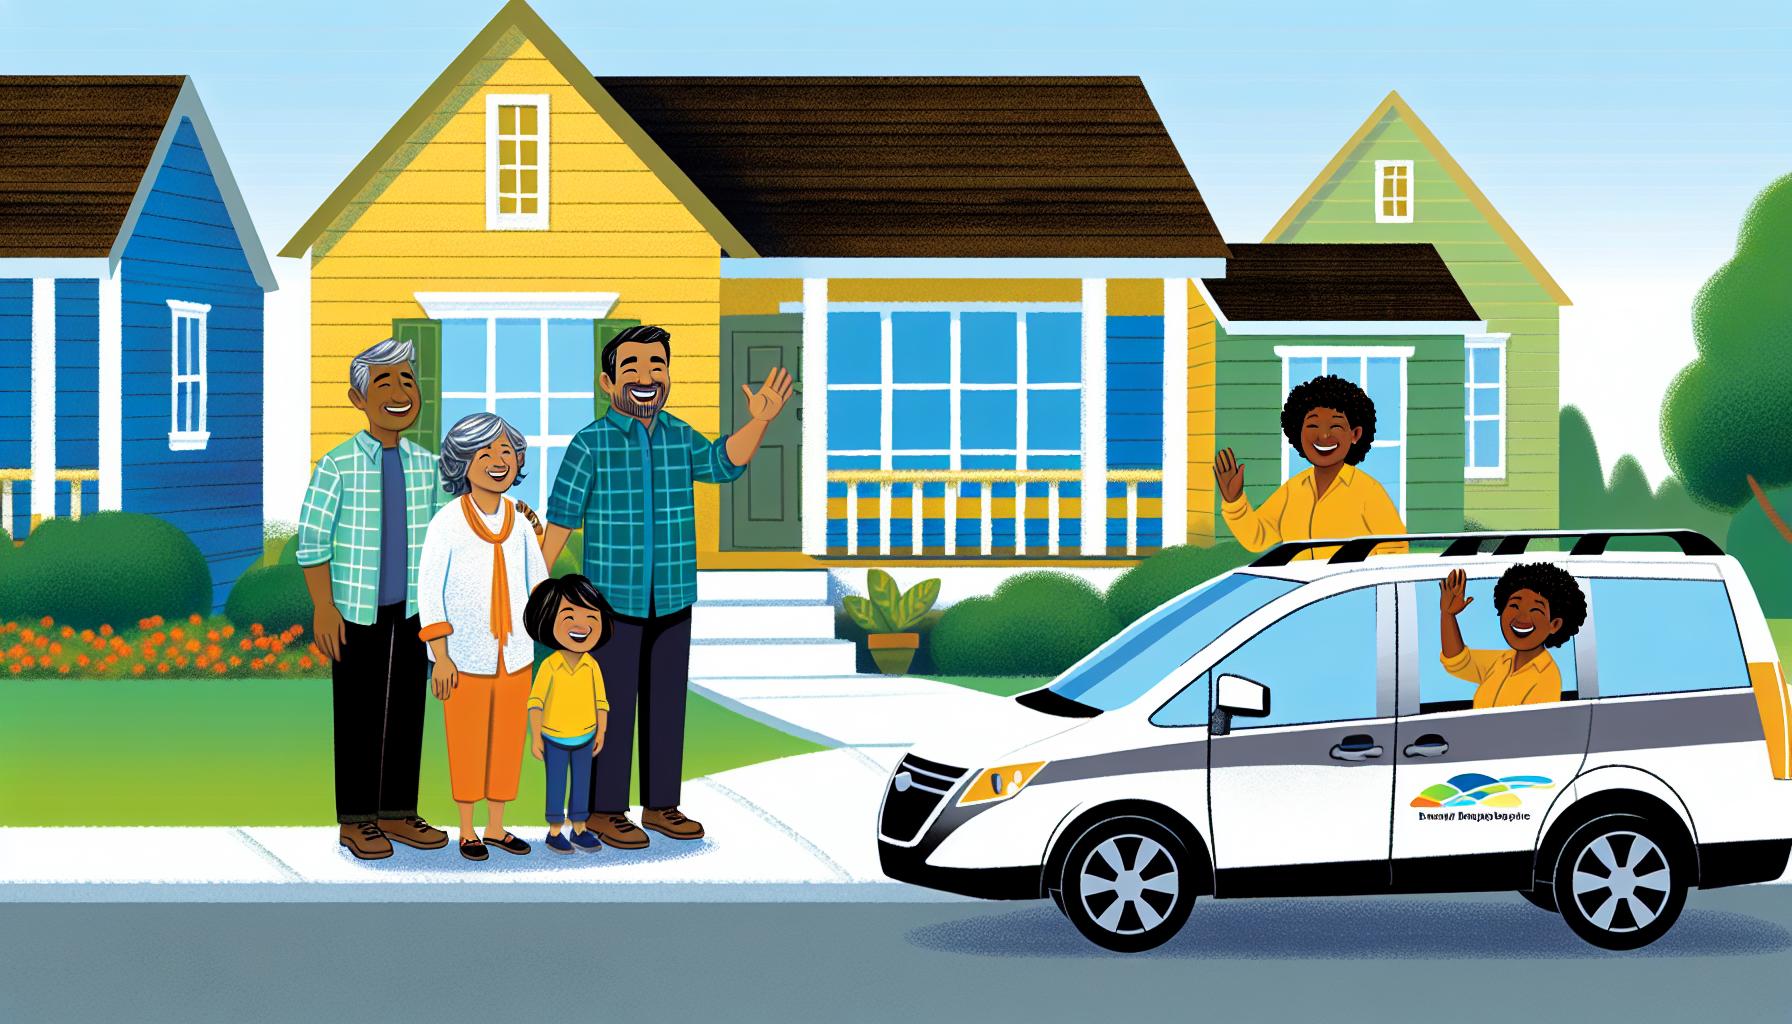 A happy family standing outside their home, waving goodbye as their child boards a vehicle with a cheerful driver